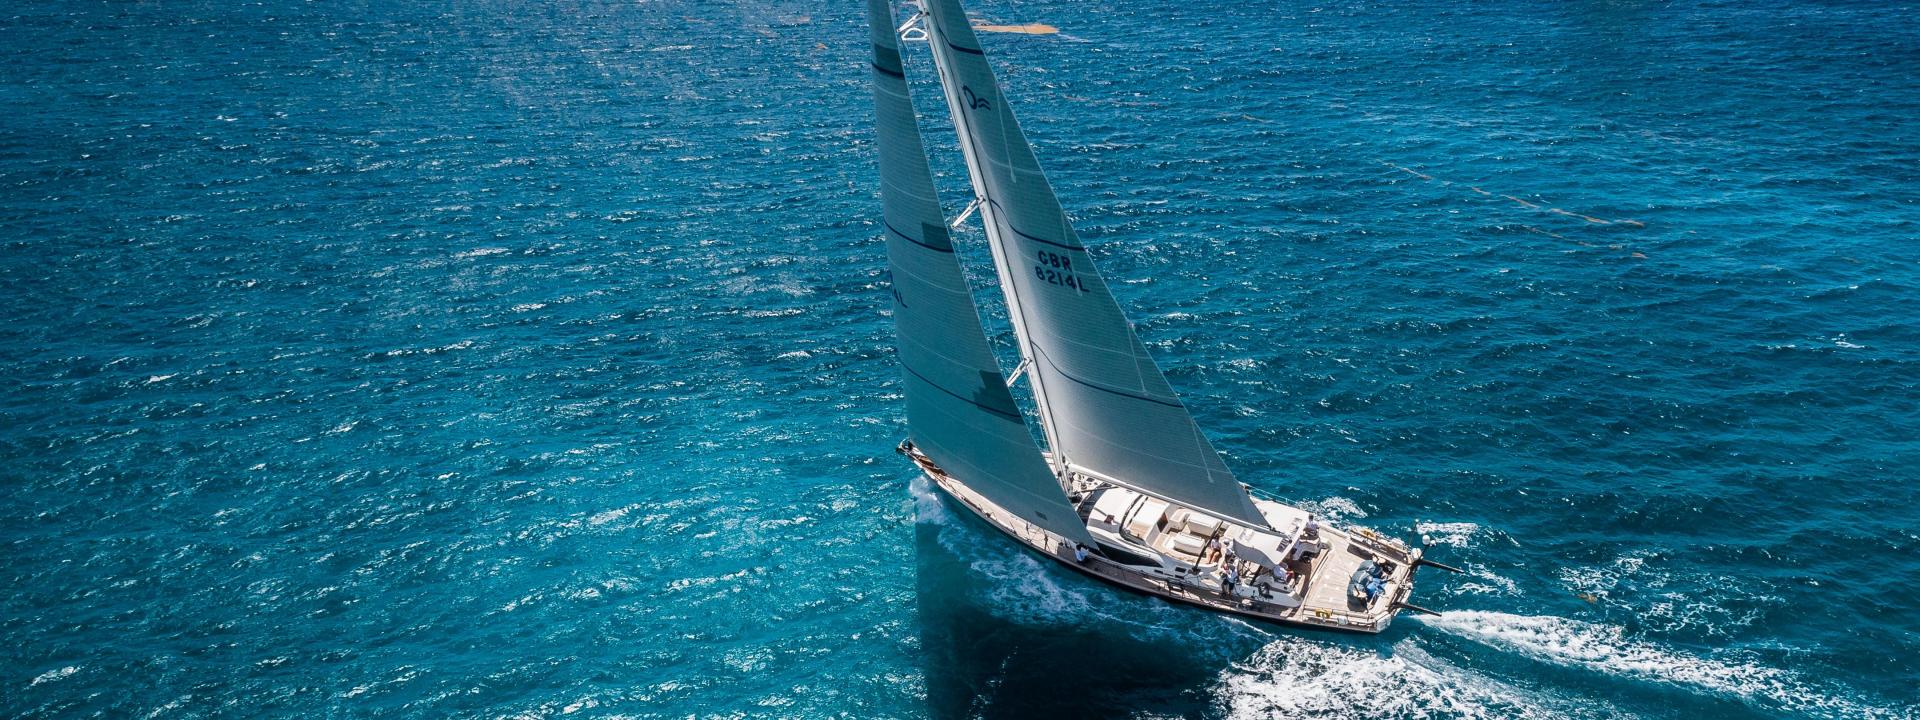 Bluwater Sailing Yacht Oyster Heritage D v31